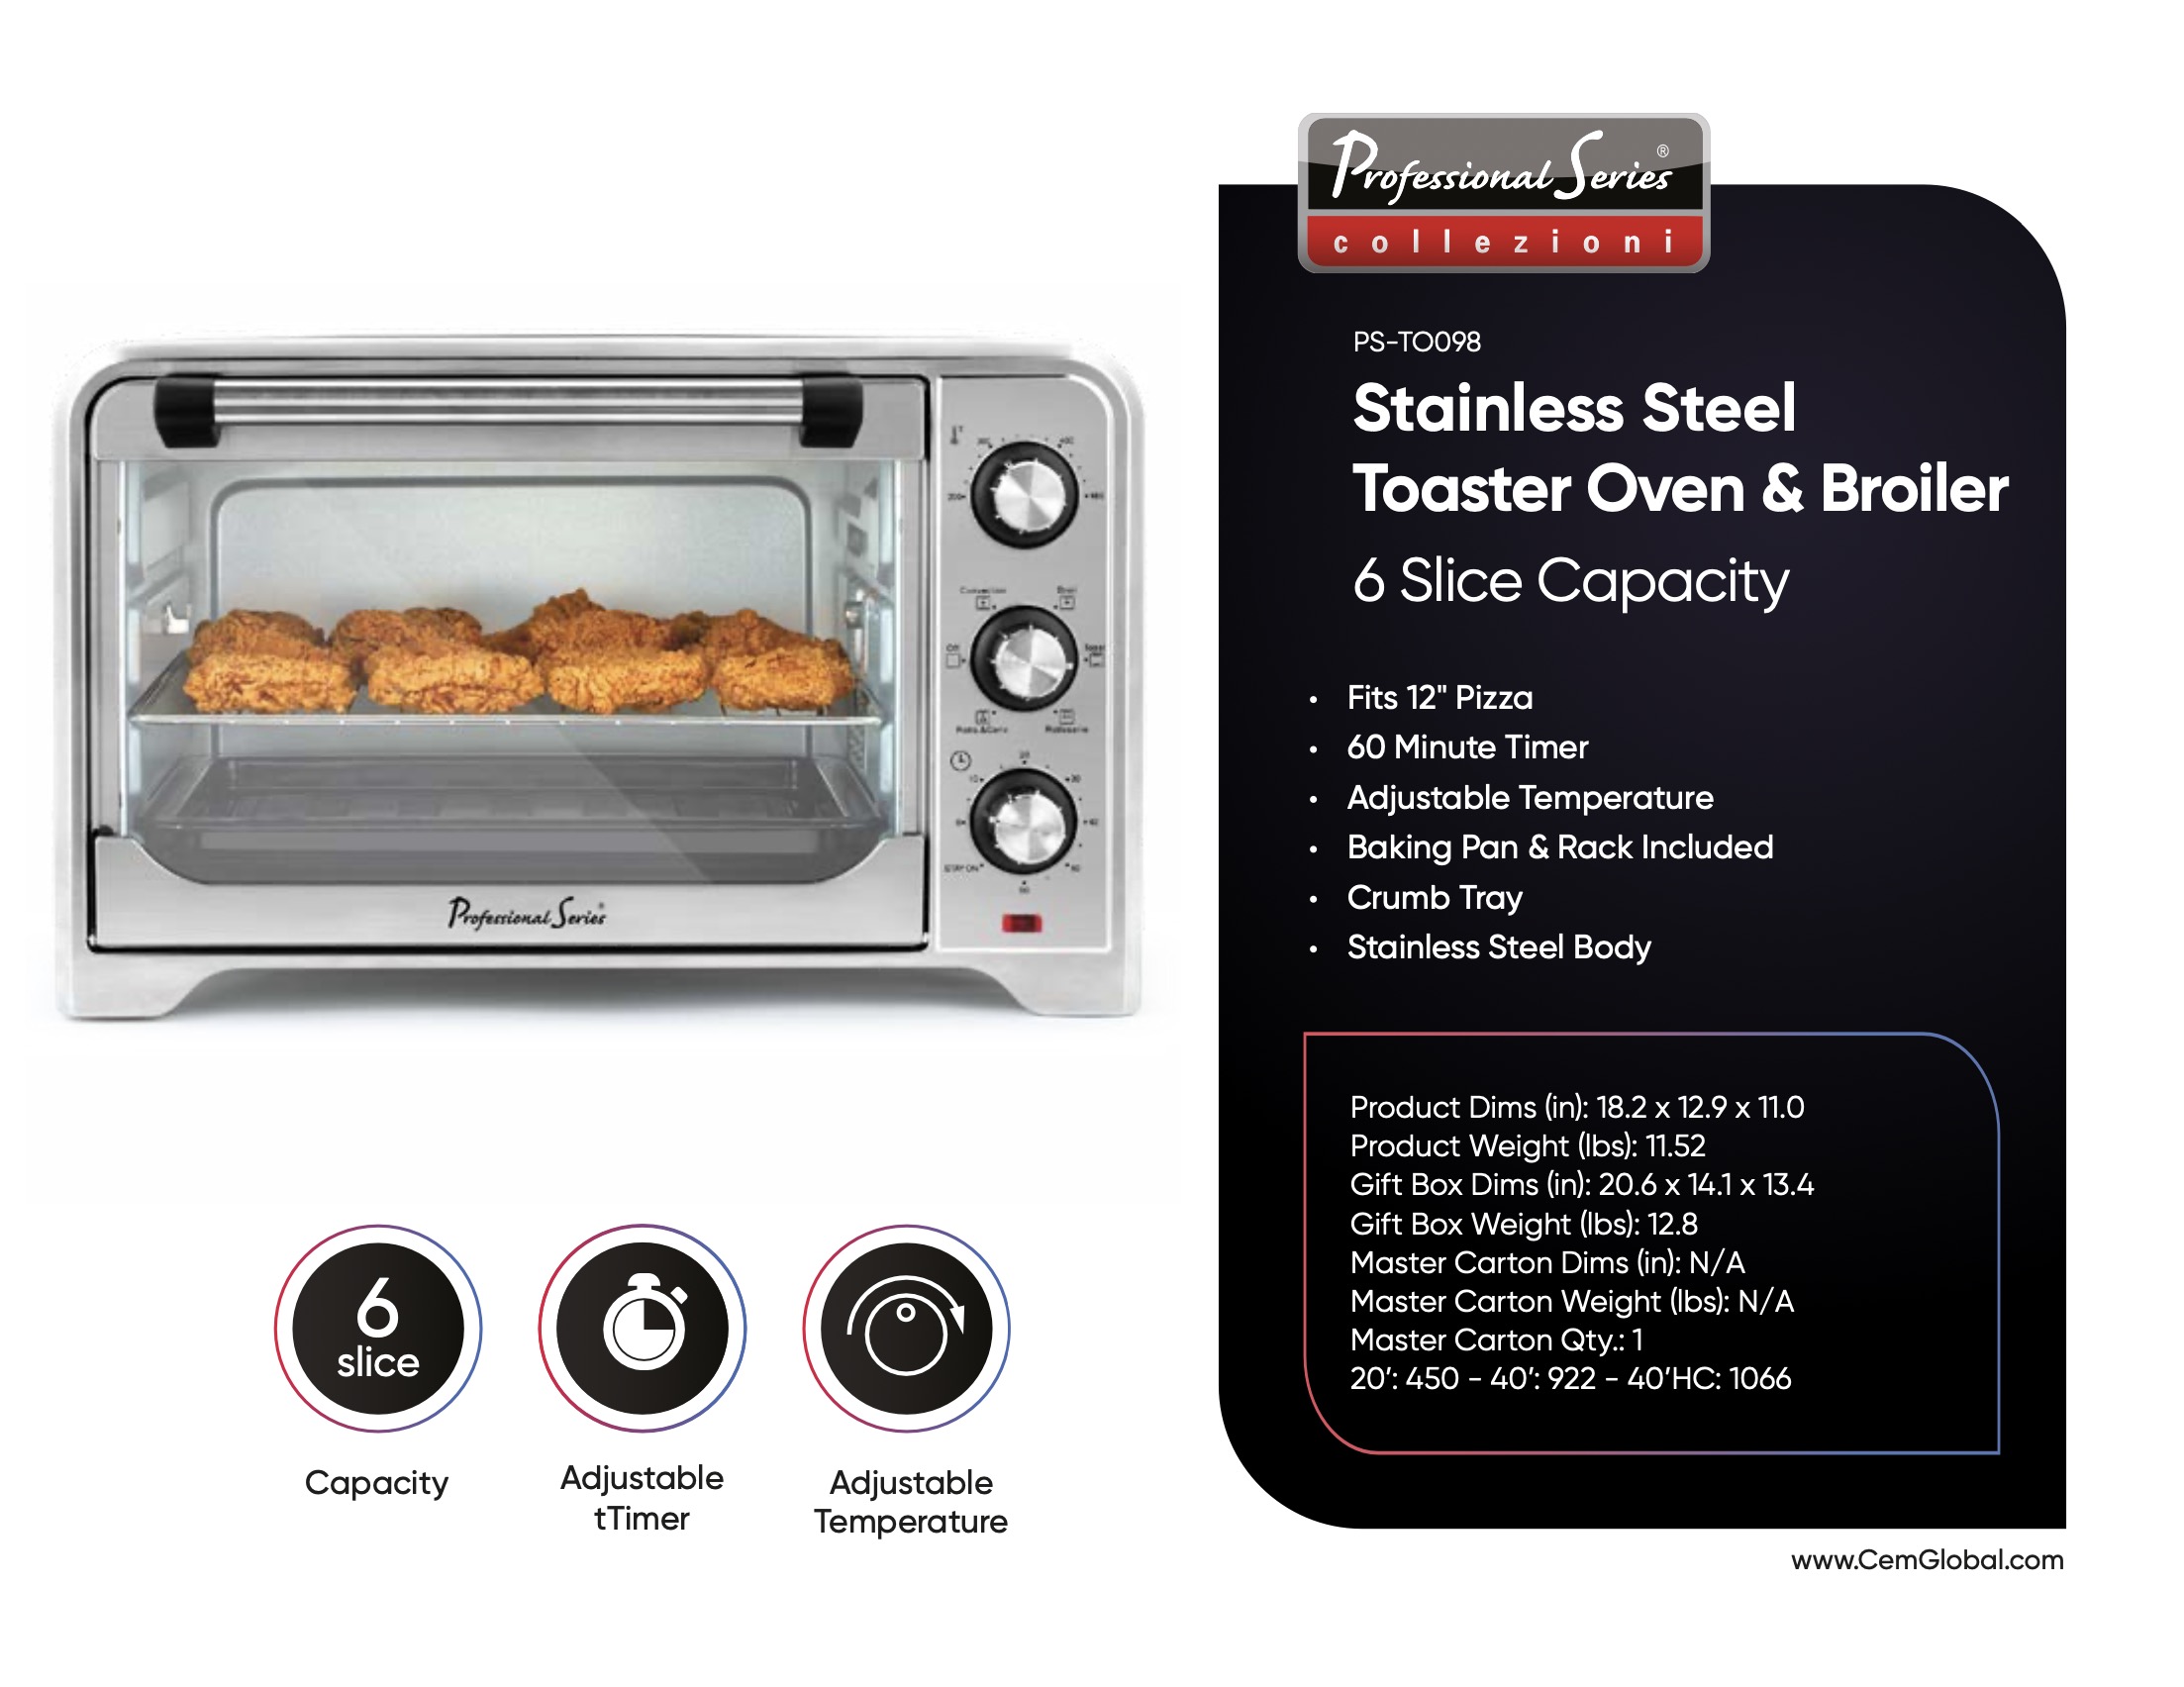 Stainless Steel Toaster Oven & Broiler 6 Slice